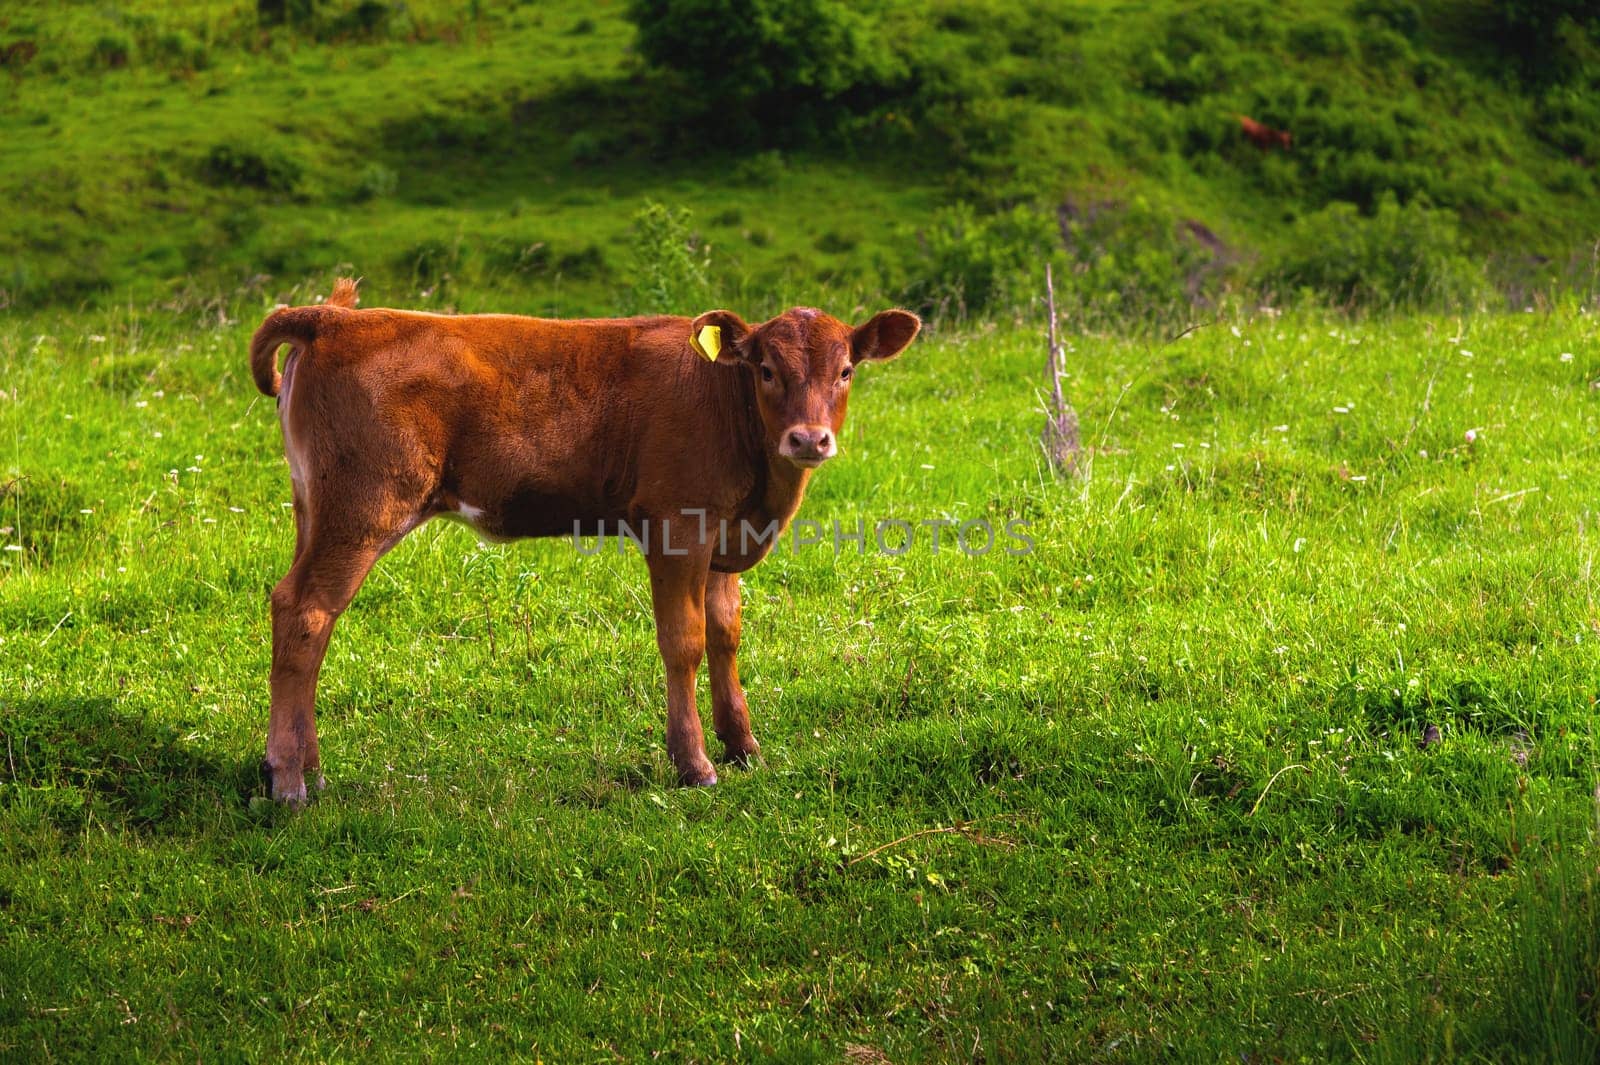 a brown calf stands on green grass and looks at the camera. a young bull curiously explores the area while grazing in the spring or summer outdoors.